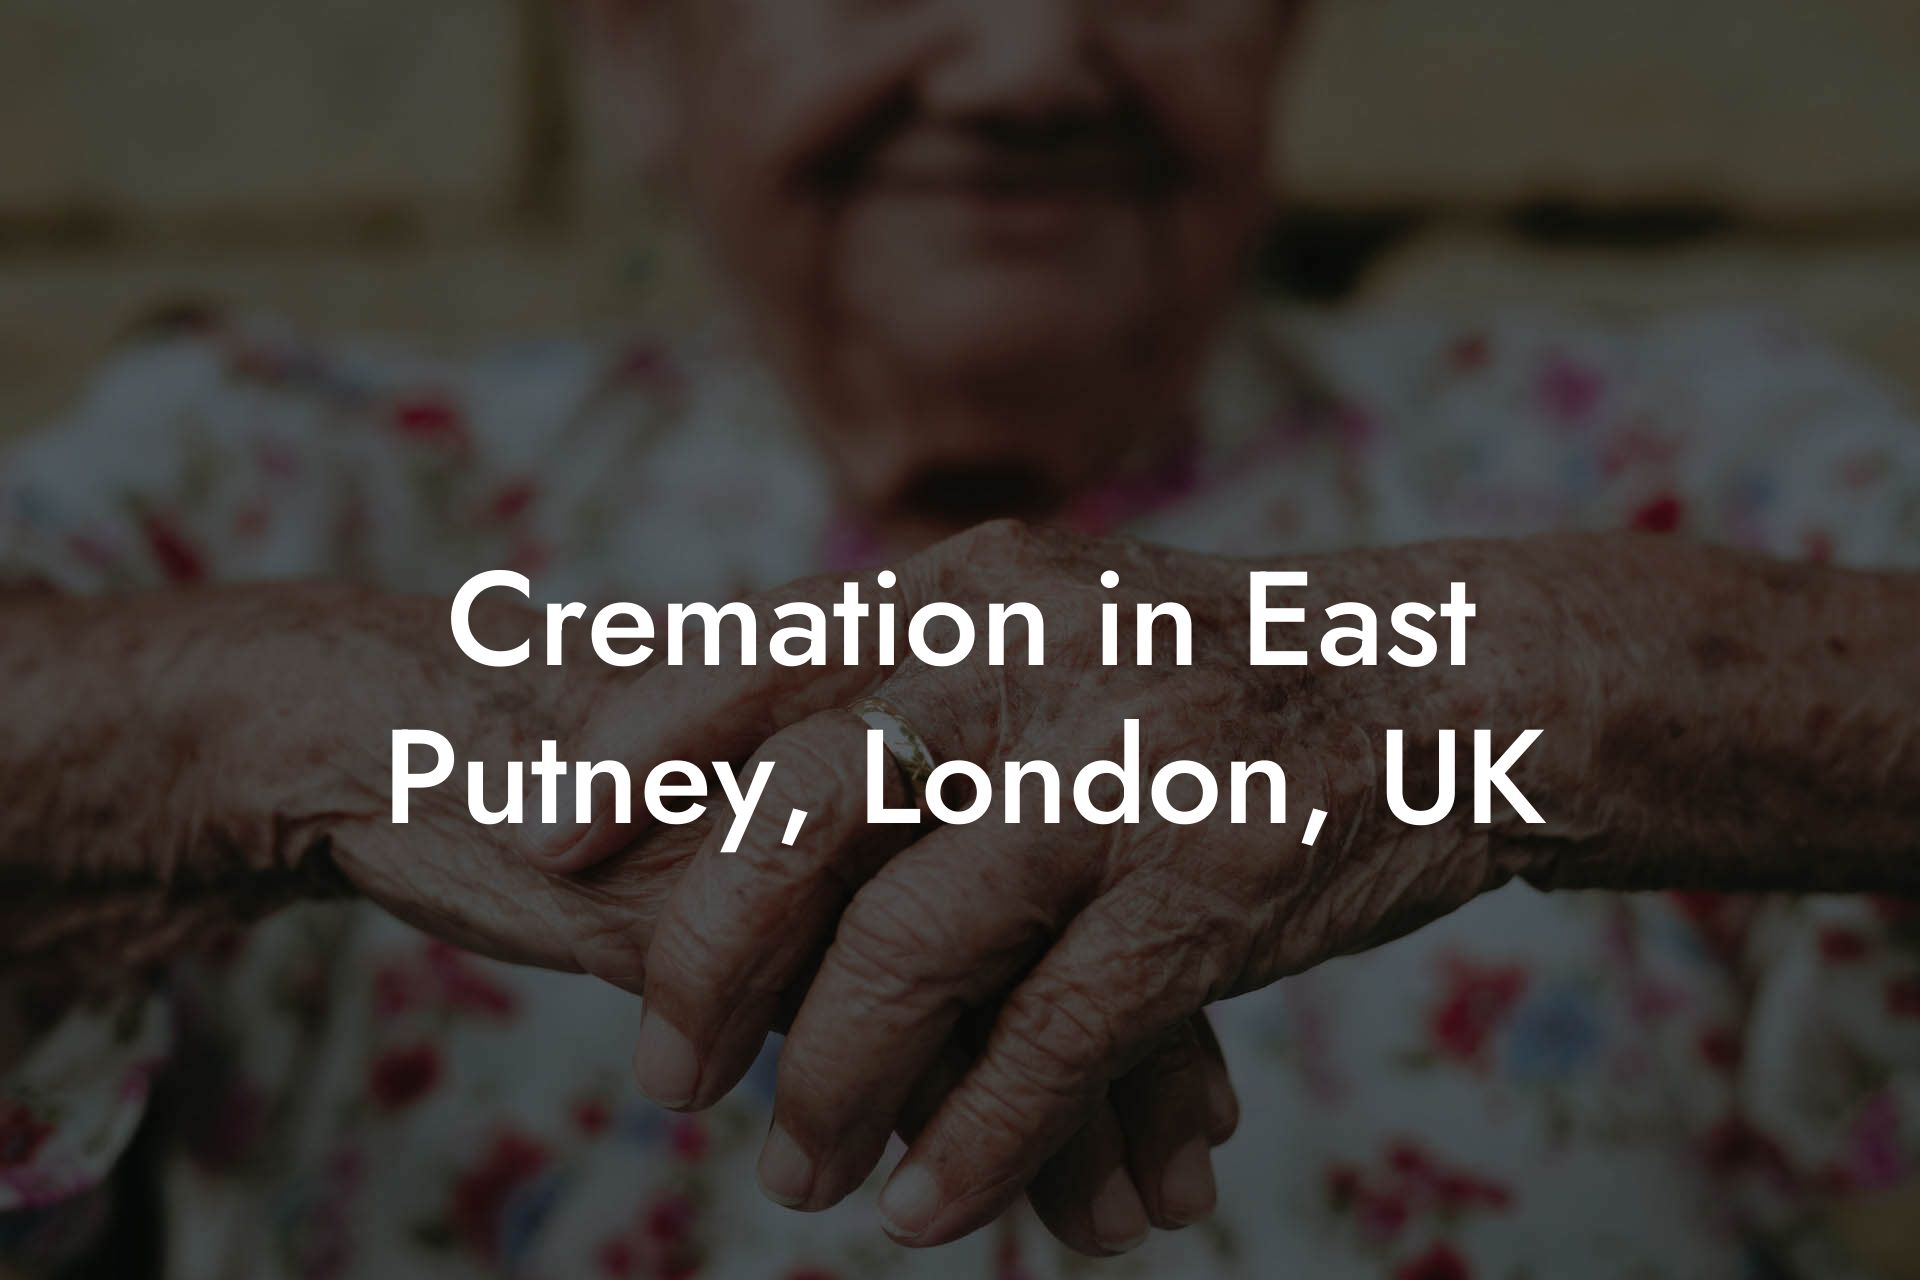 Cremation in East Putney, London, UK